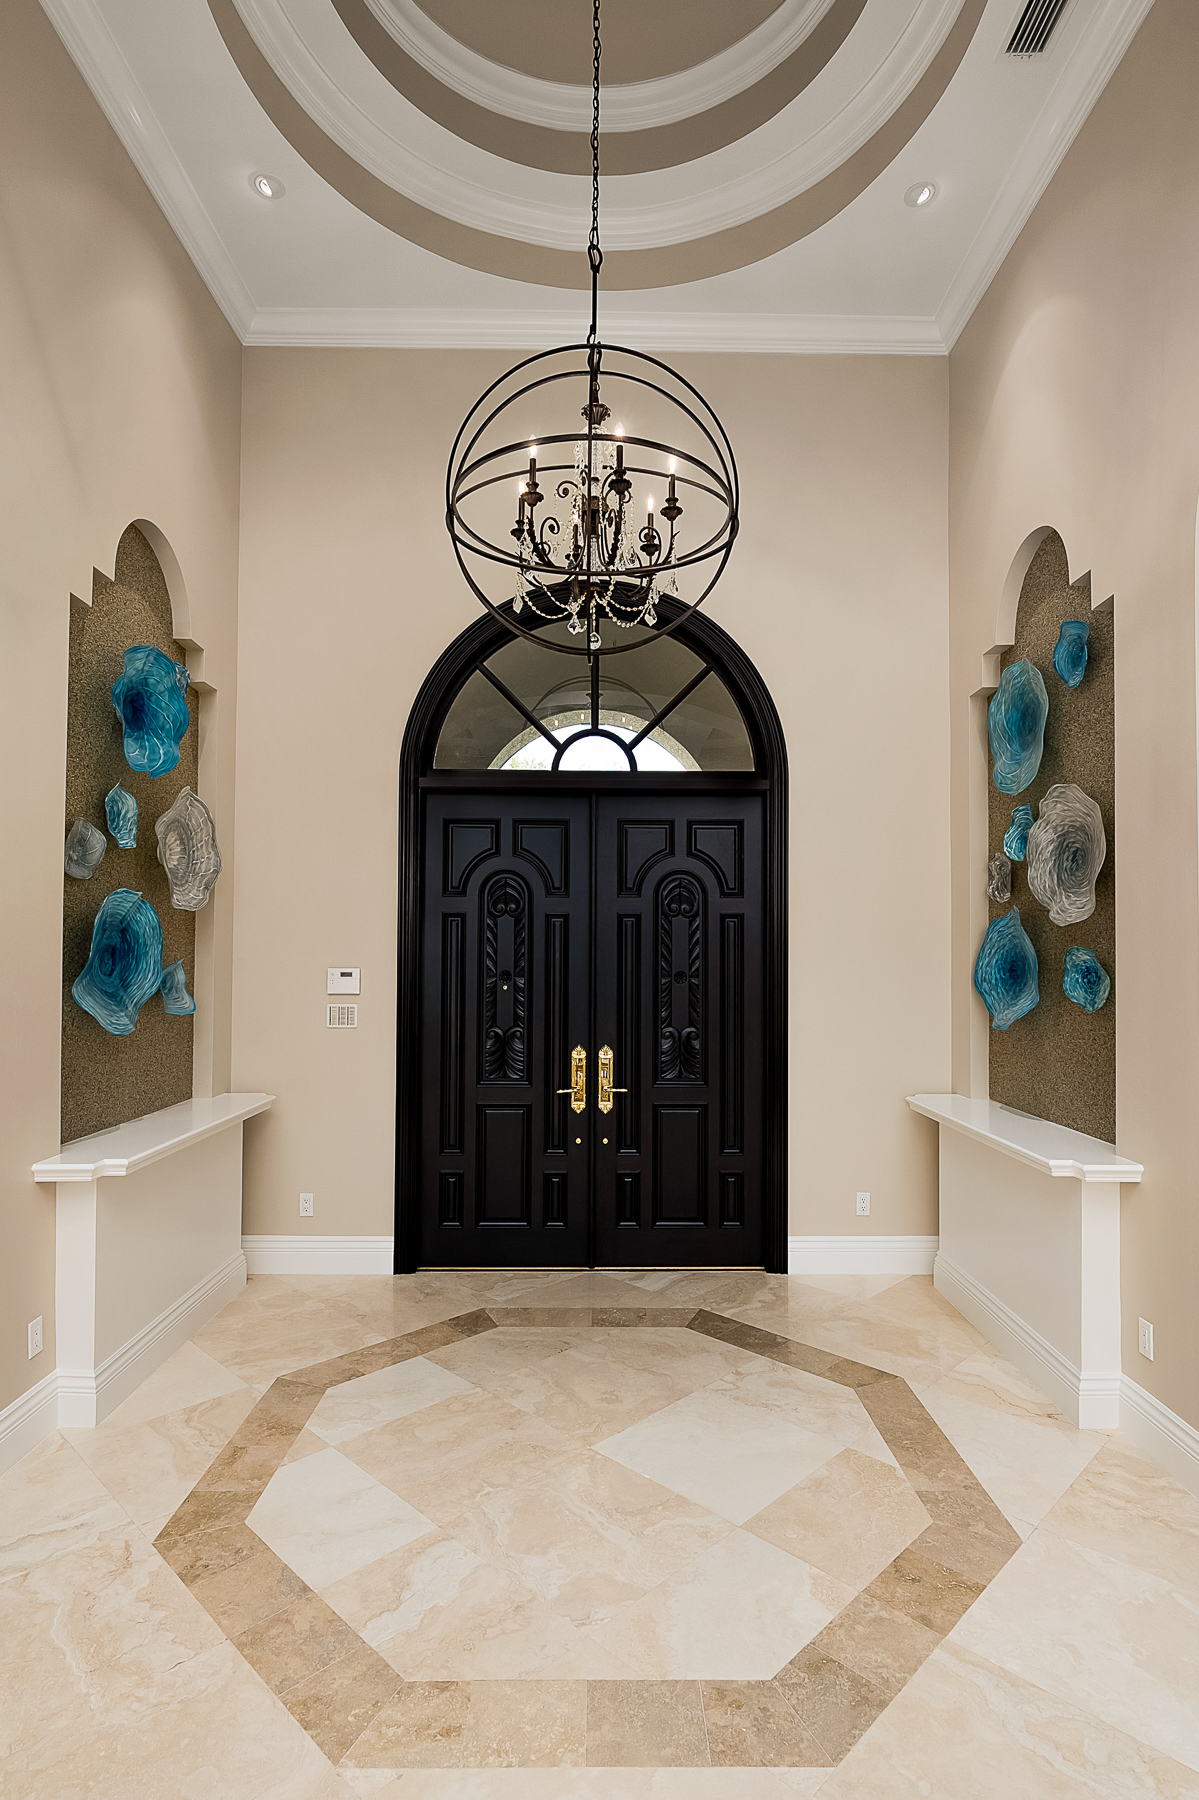 The focal point at the entrance features 2 large niches with hand blown glass bowls custom designed by a local artist